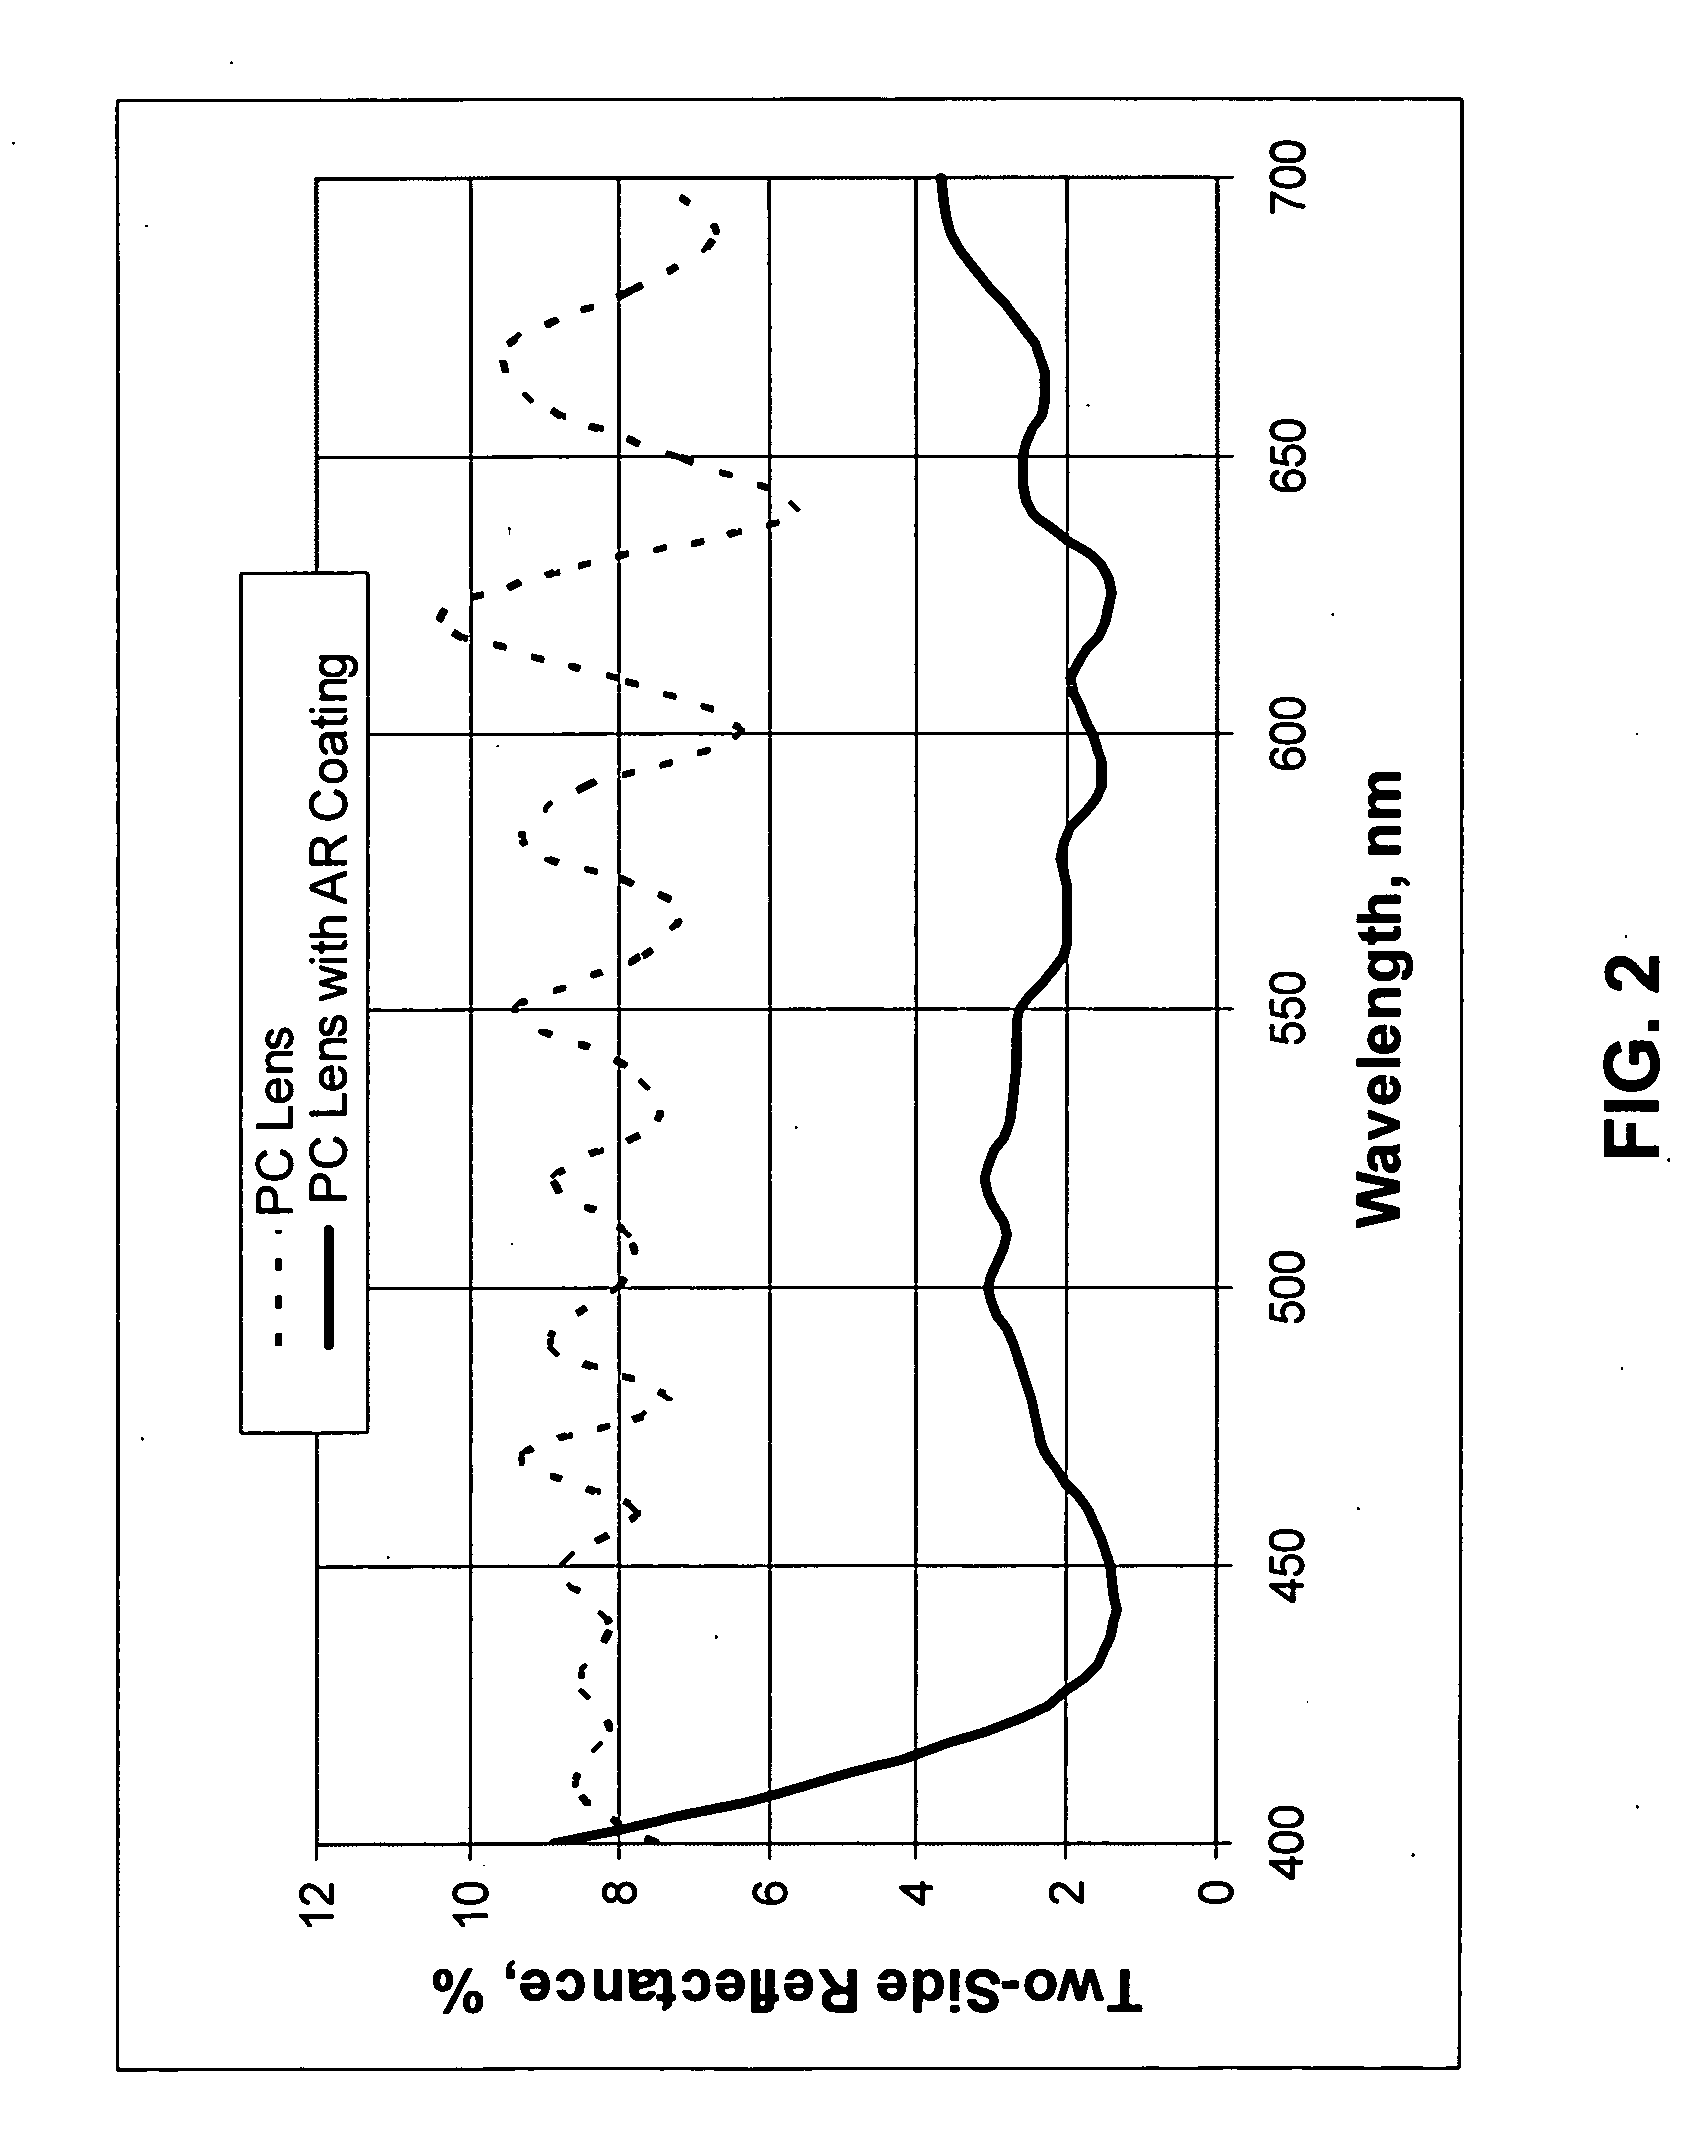 Antireflective coating compositions and methods for depositing such coatings